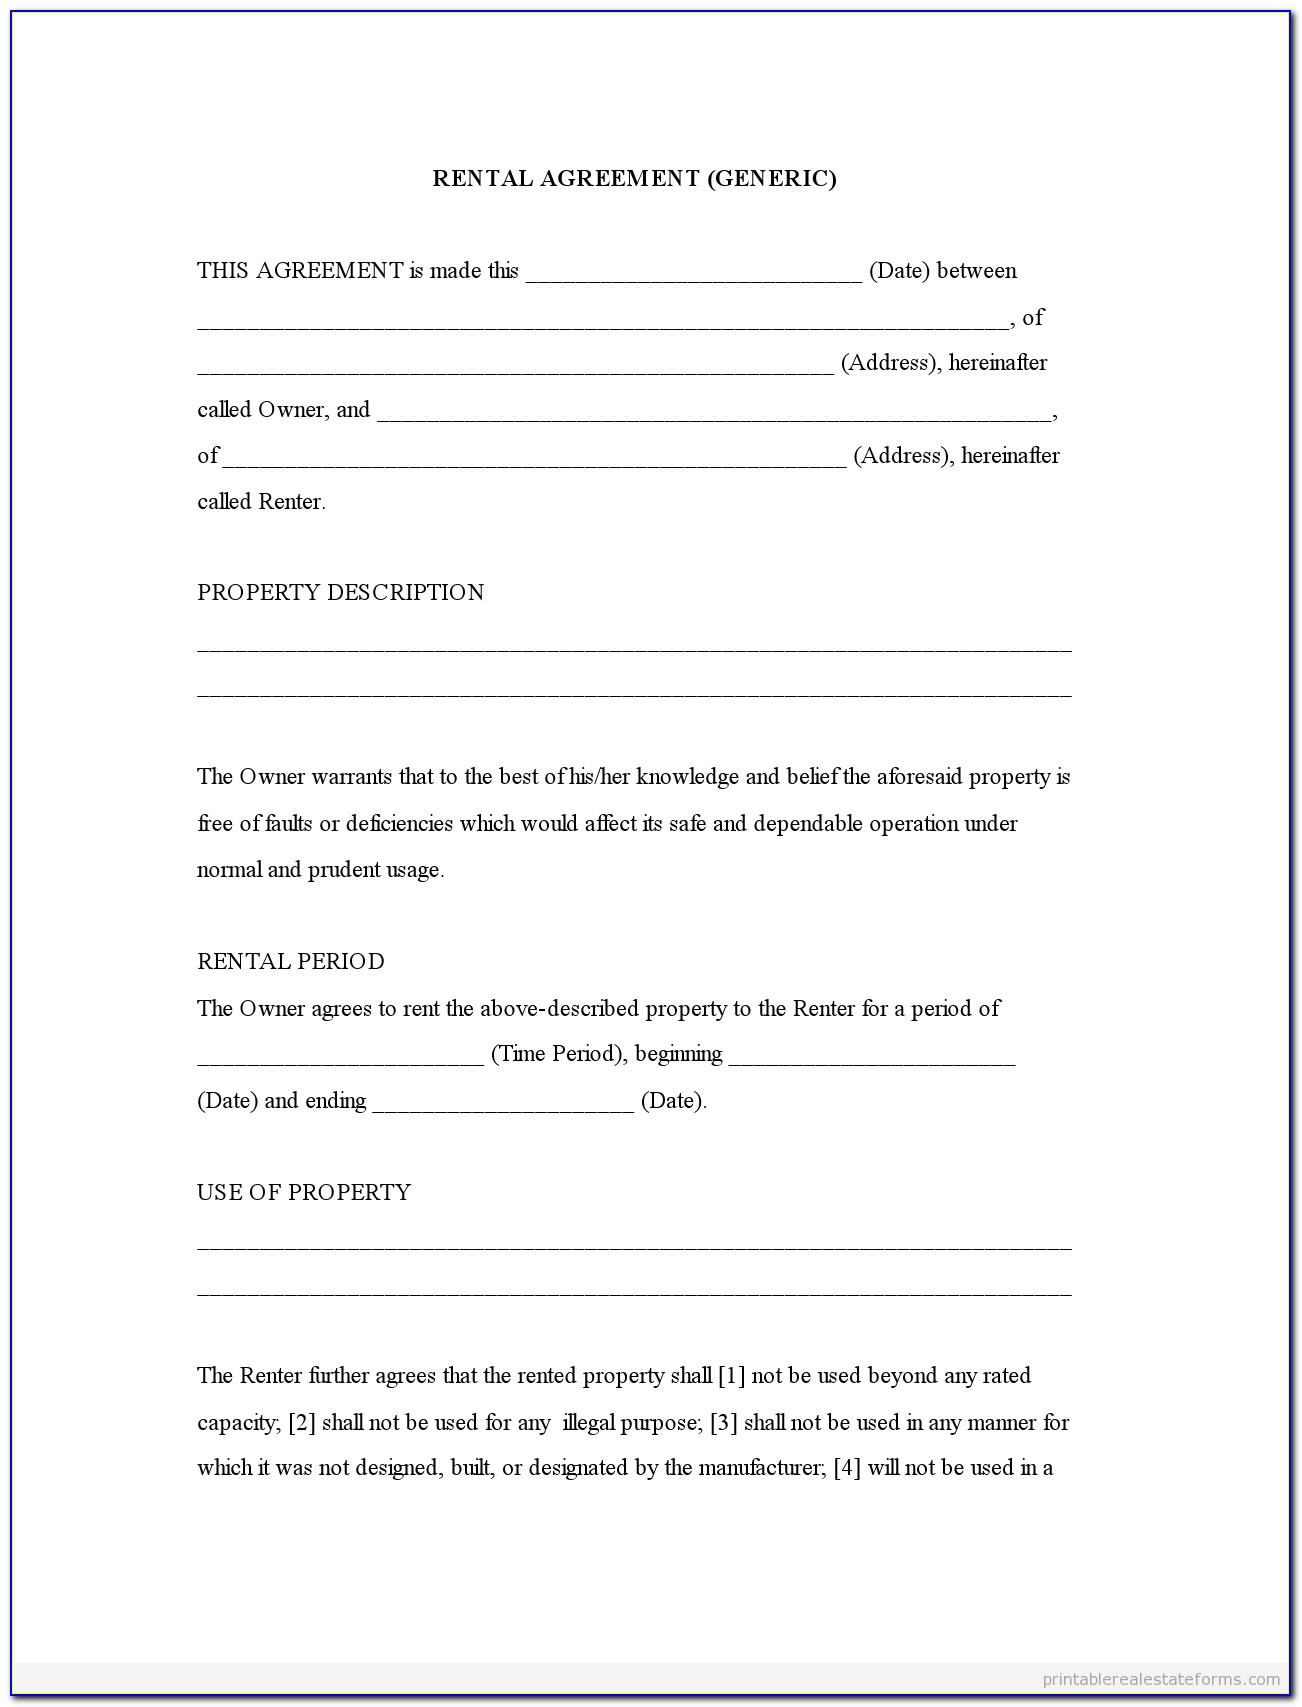 Rental Agreement Contract Form